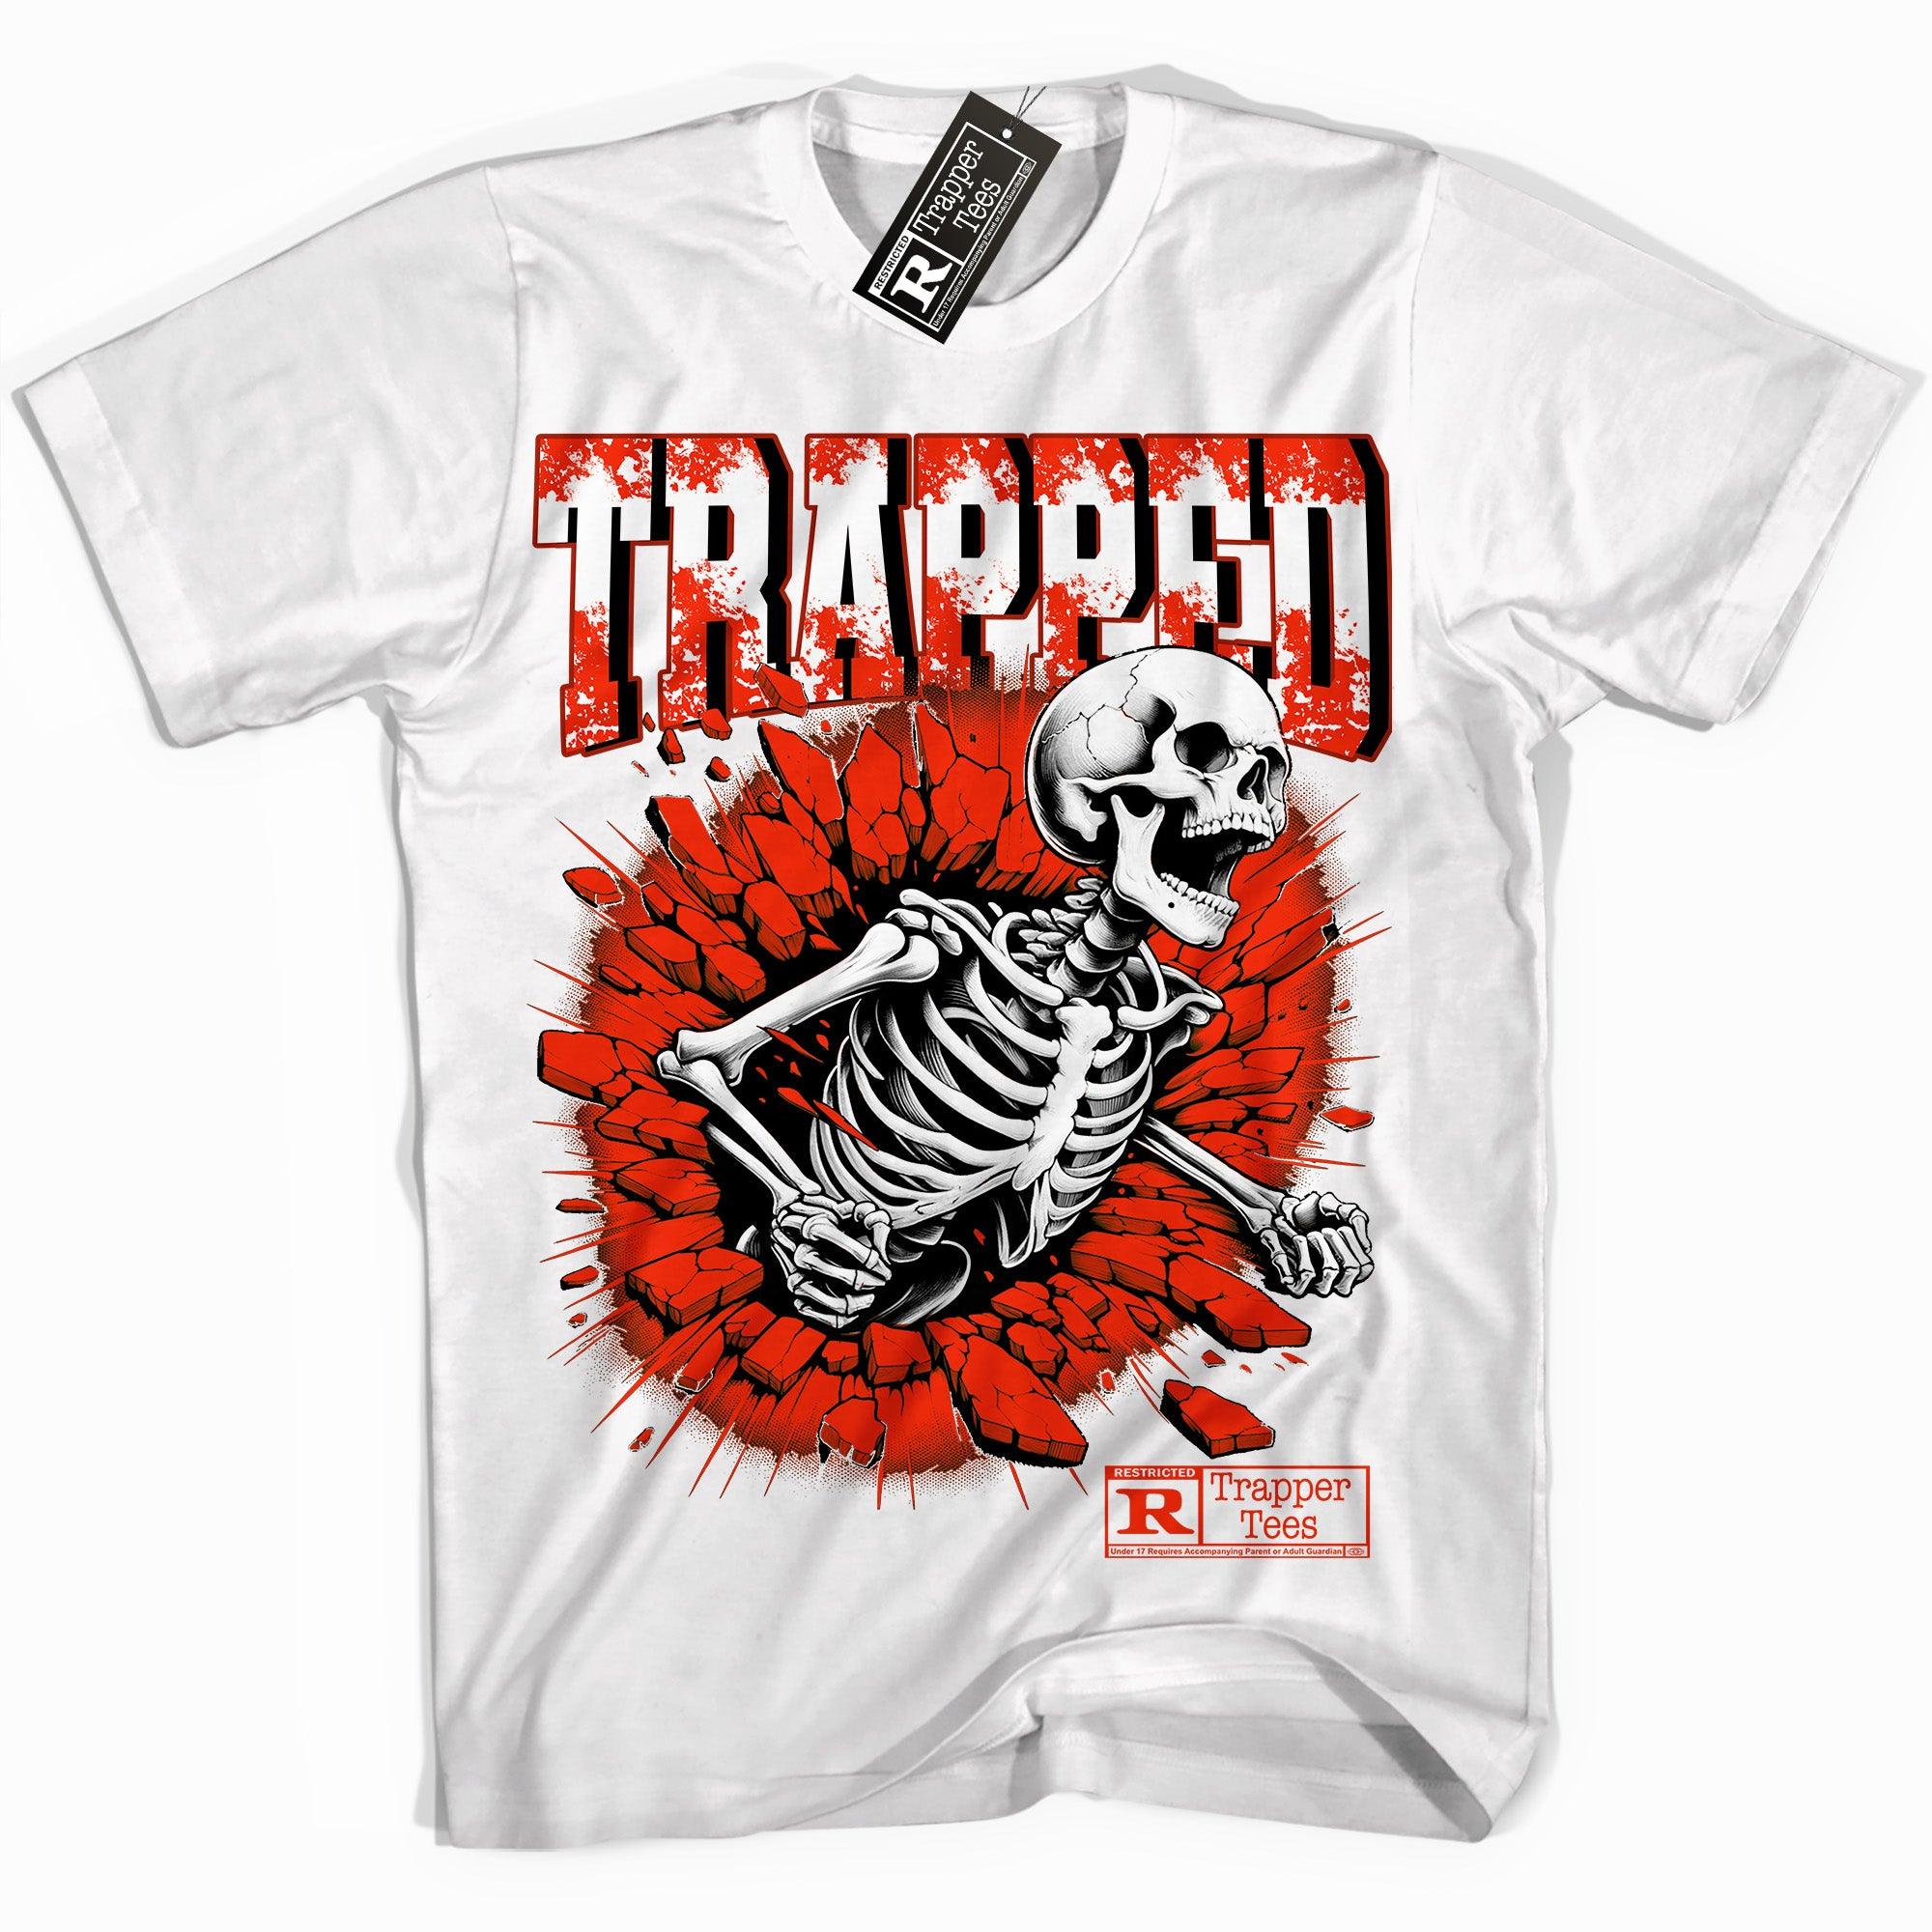 Cool White graphic tee with “ Trapped Skull ” print, that perfectly matches Air Jordan 11 Cherry sneakers 